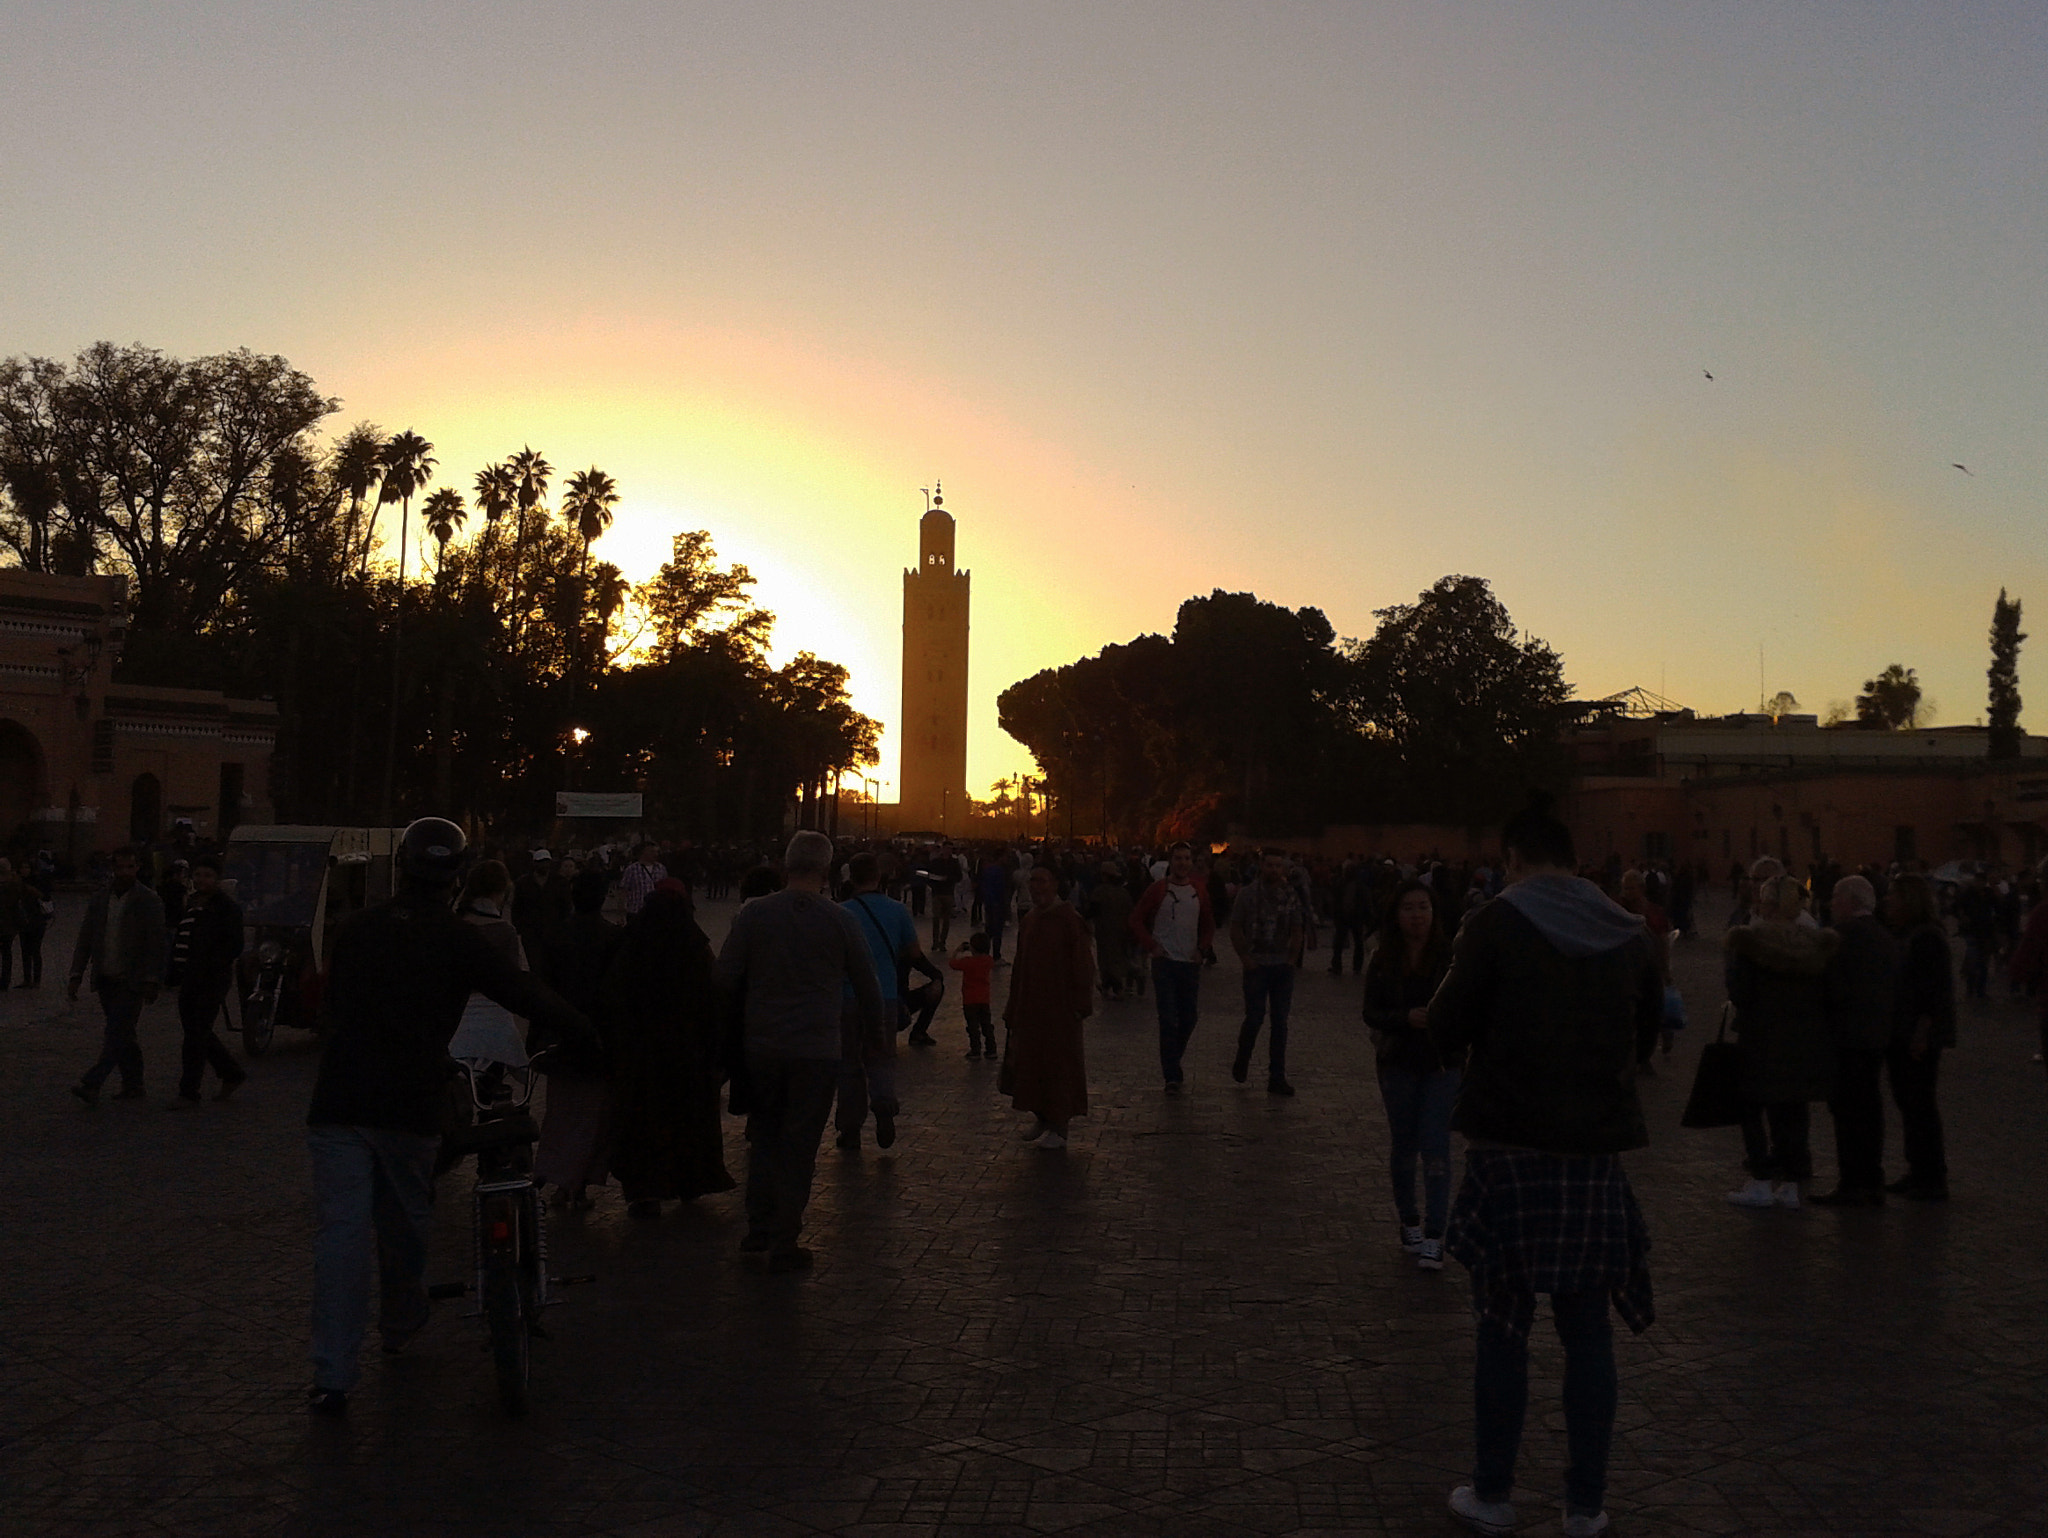 Samsung Galaxy S Advance sample photo. Sunset from marrakech, morocco photography